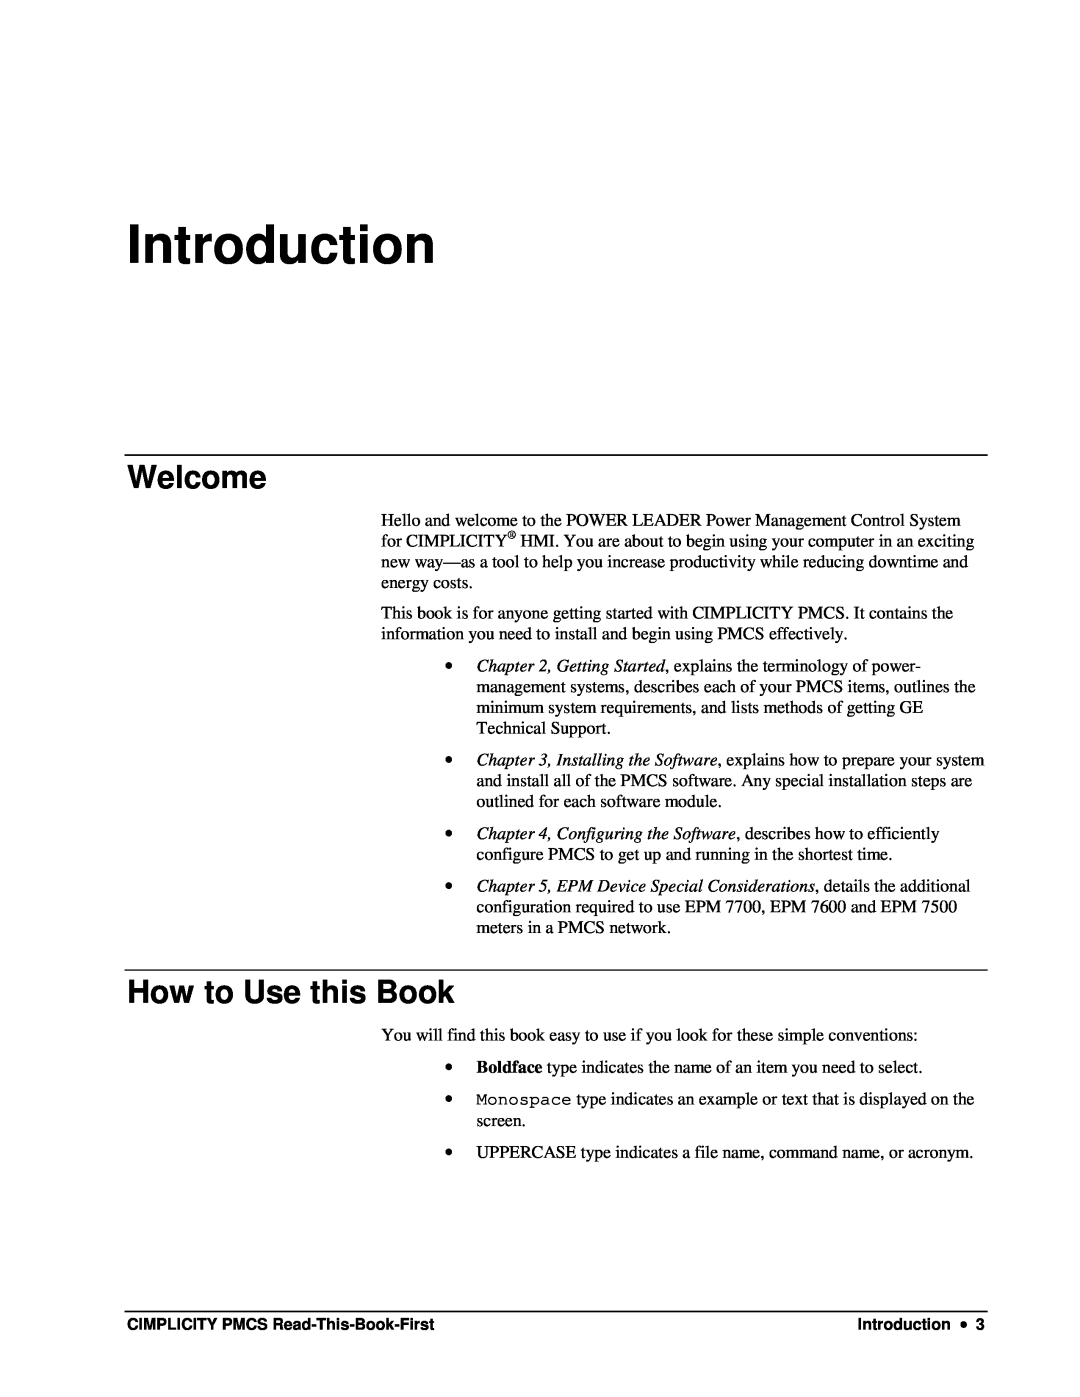 GE DEH-211 manual Introduction, Welcome, How to Use this Book 